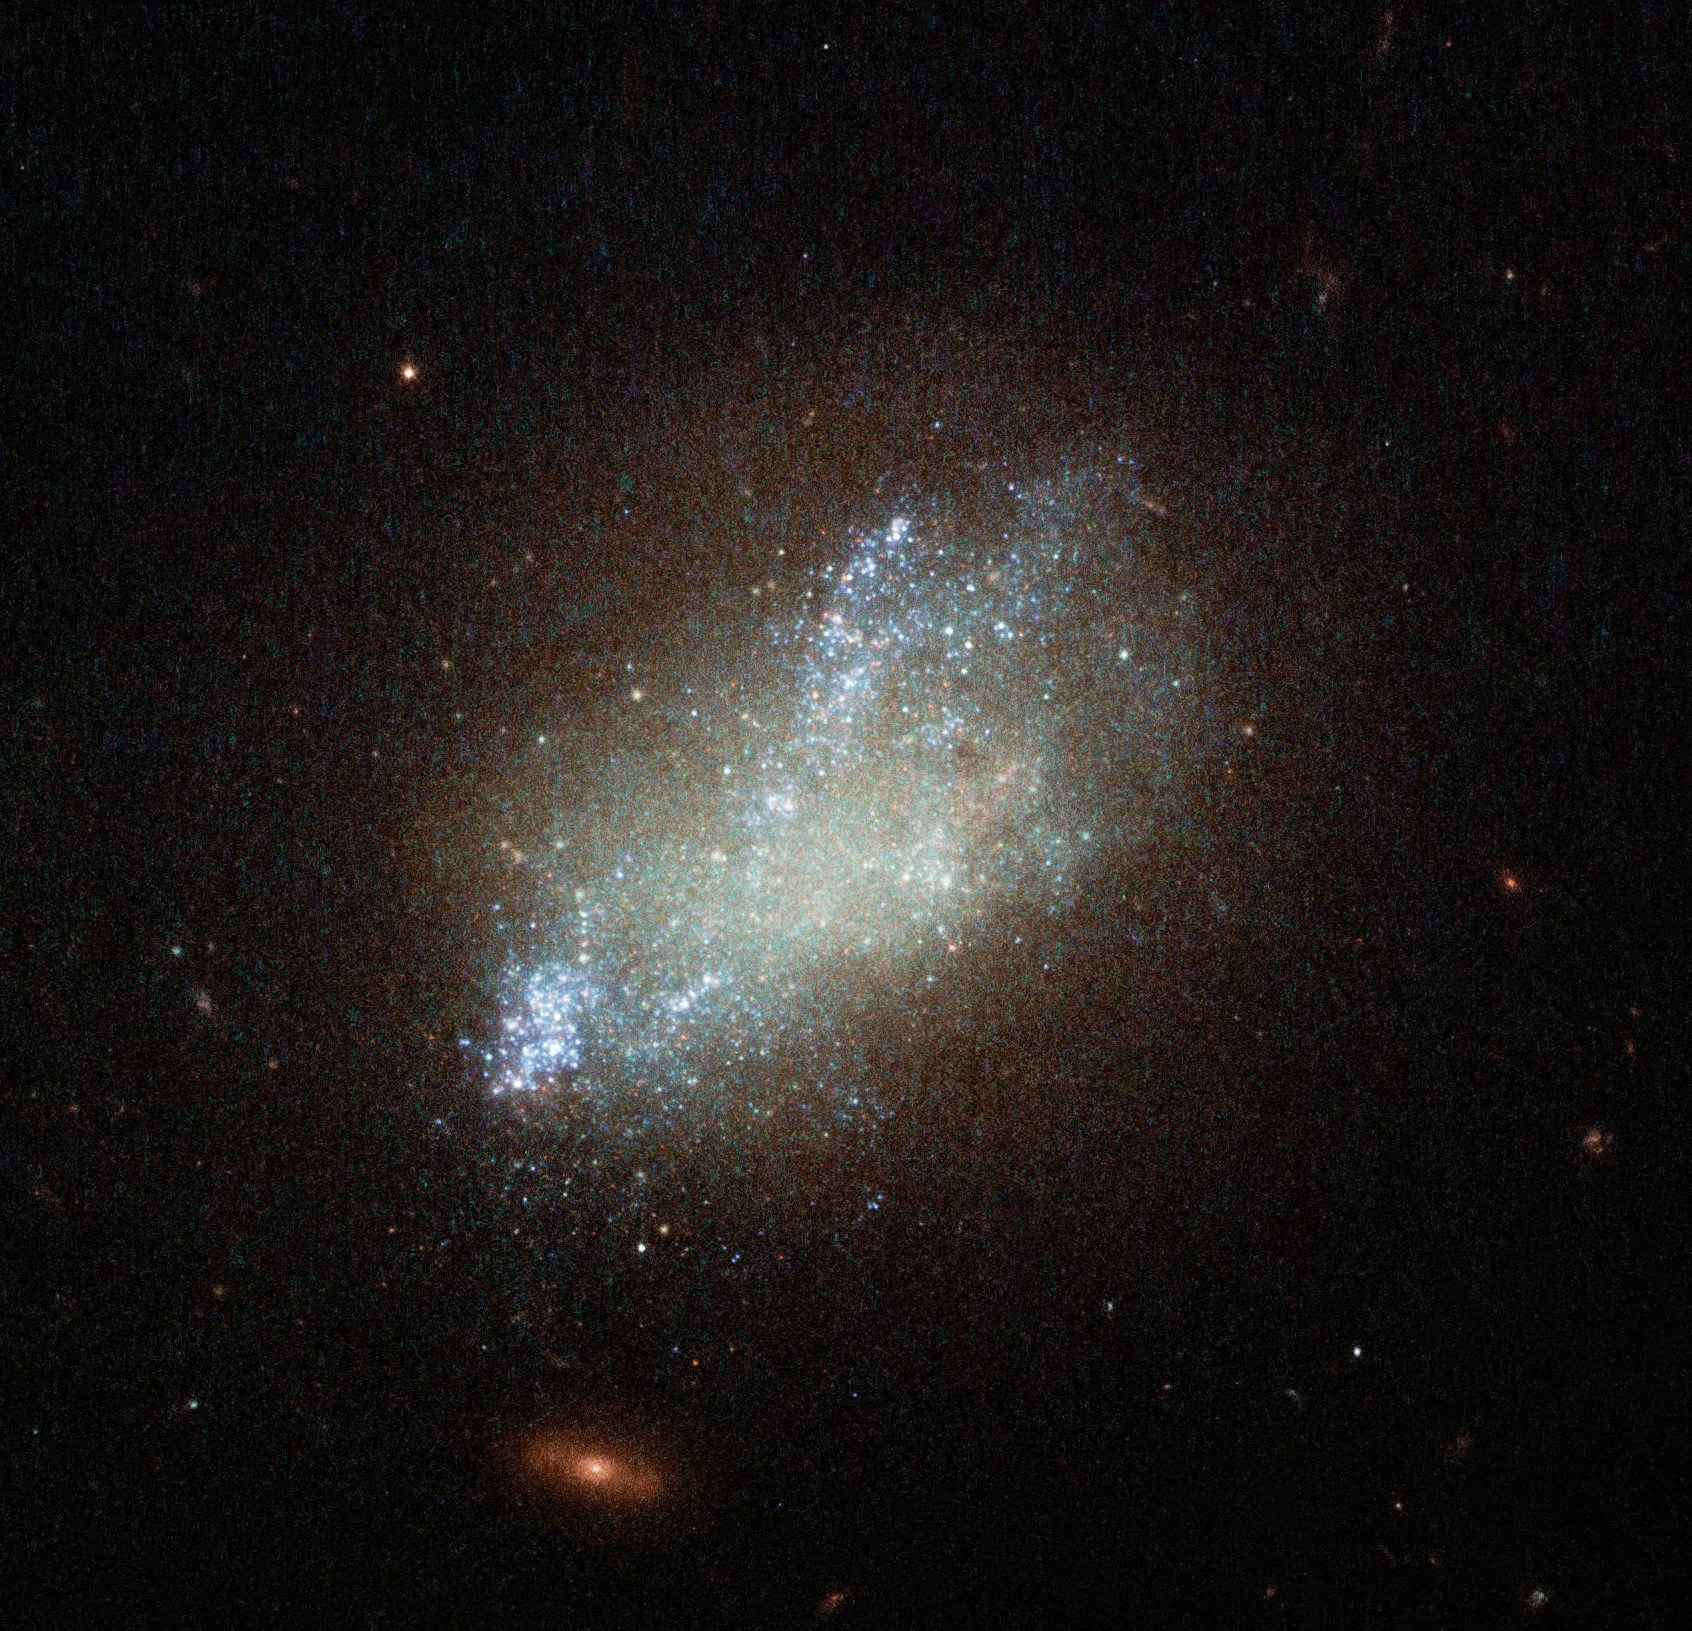 A cloudy smudge of stars with a very small orange background galaxy below it.